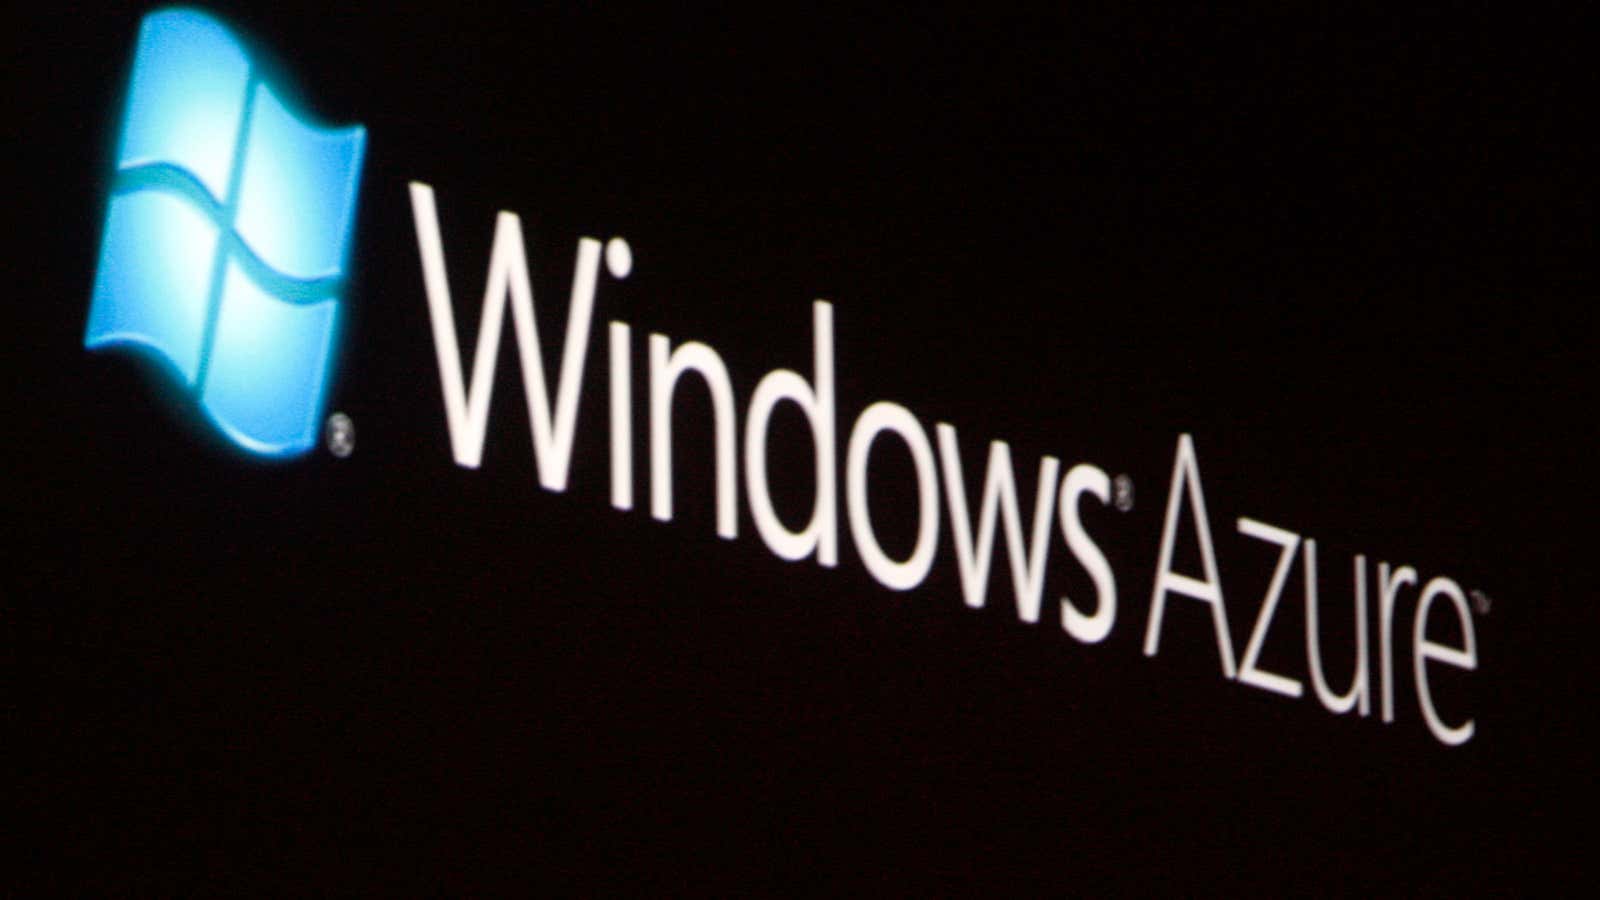 The launch of Windows Azure, with its logo shown on a screen, is announced by Chief Software Architect at Microsoft Ray Ozzie at the 2008…